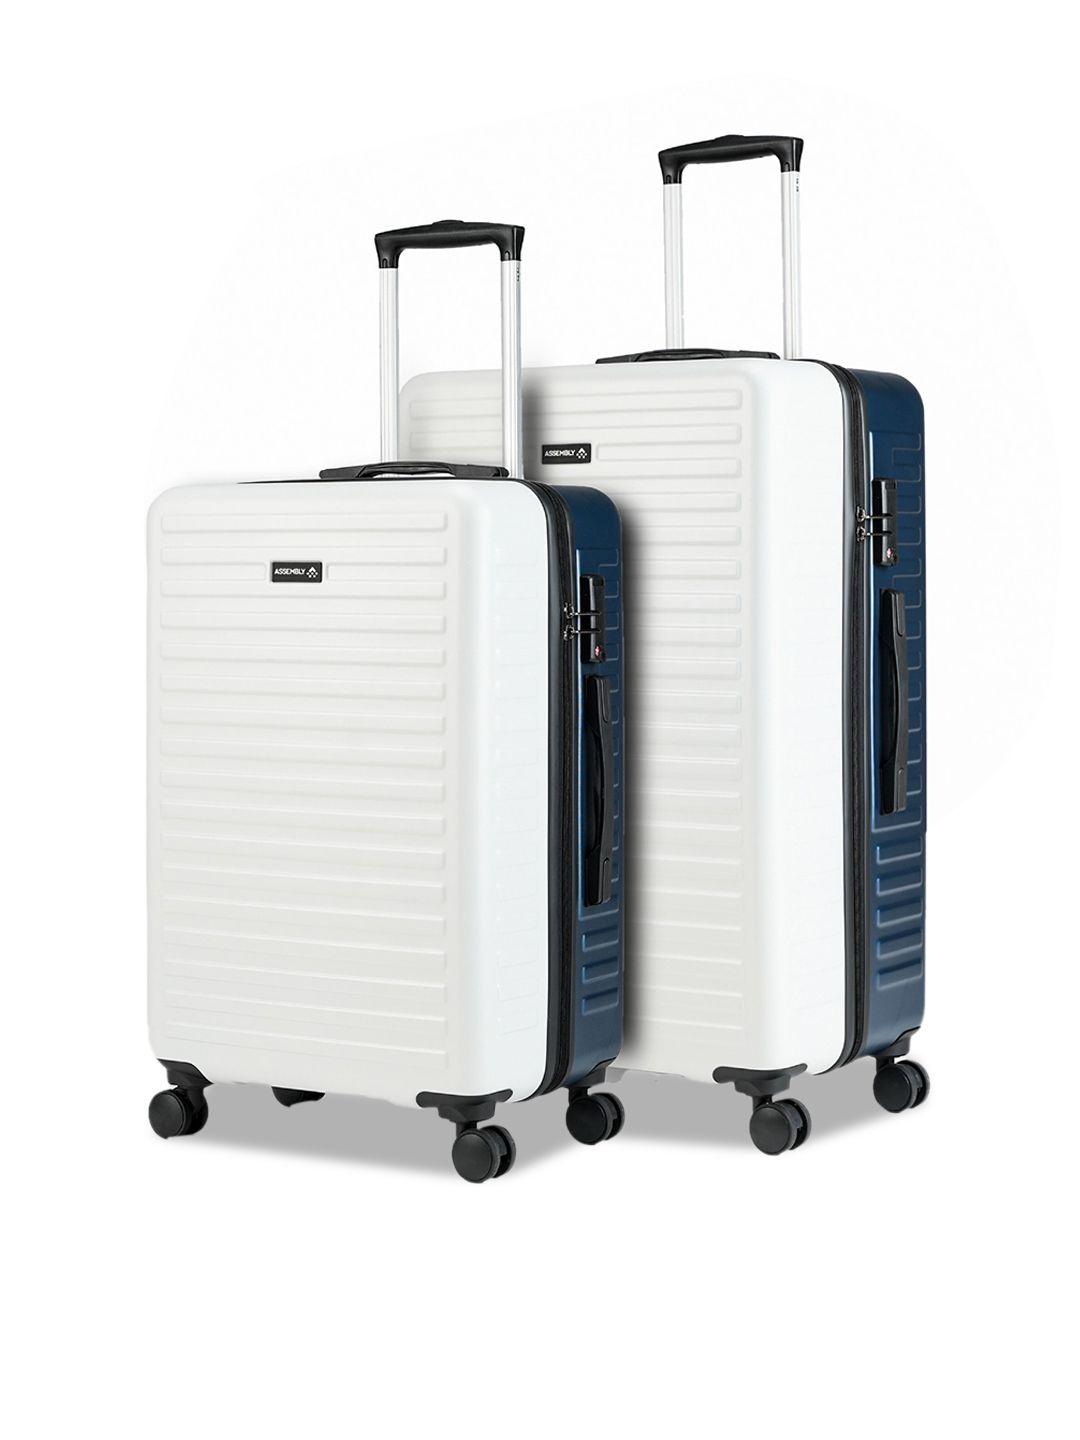 assembly set of 2 textured hard medium-sized & large-sized trolley bags 67l & 94l